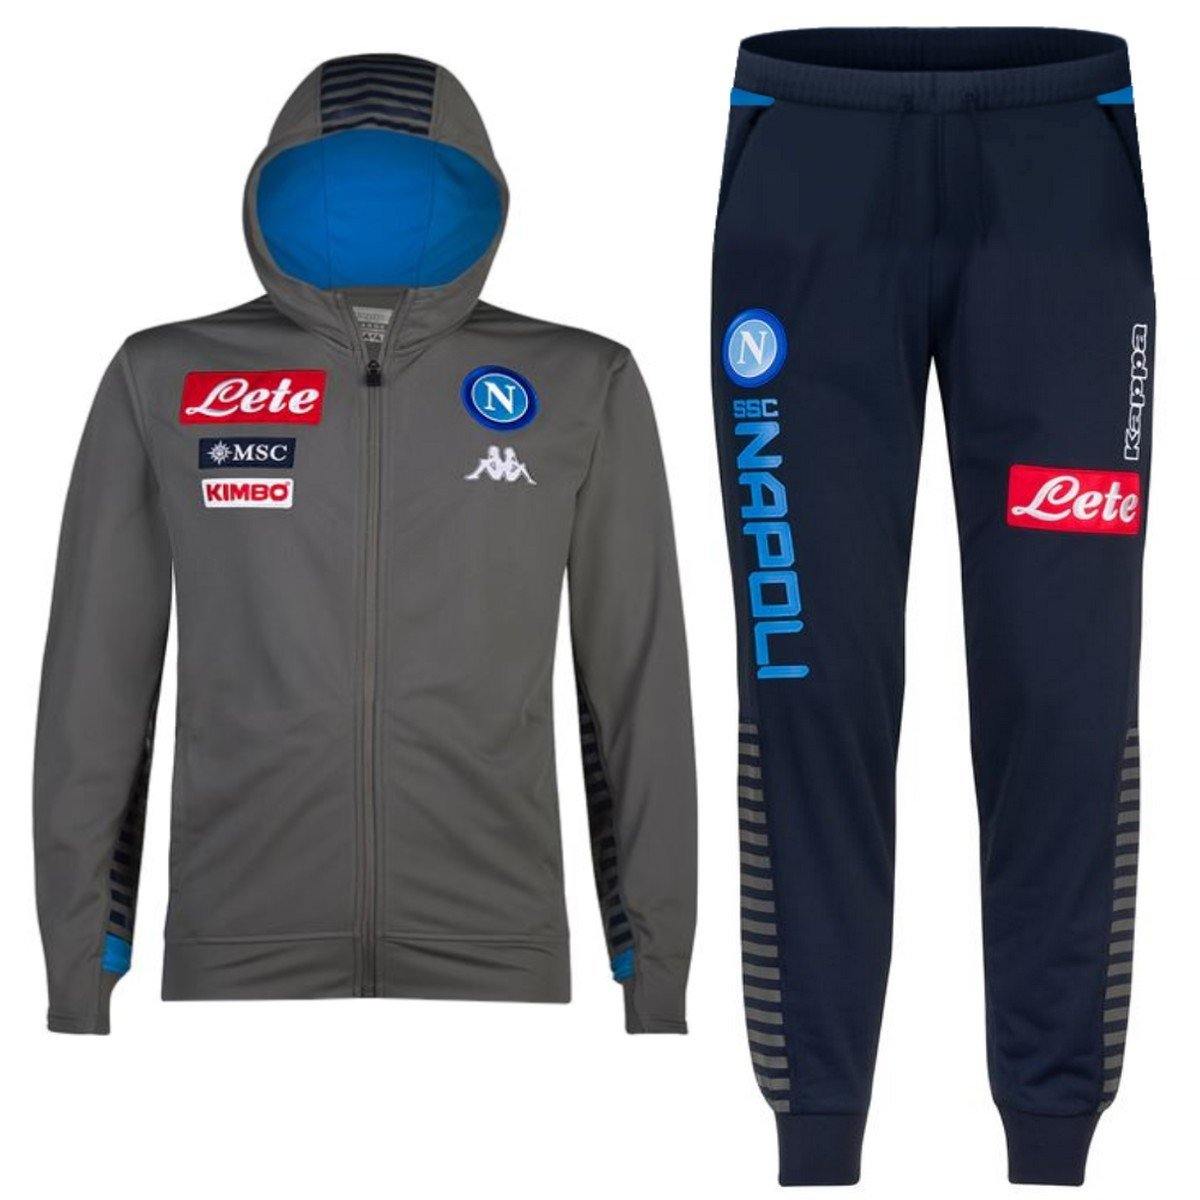 Kappa SSC Napoli Representation Tracksuit in Grey Microfibre with Hood ...